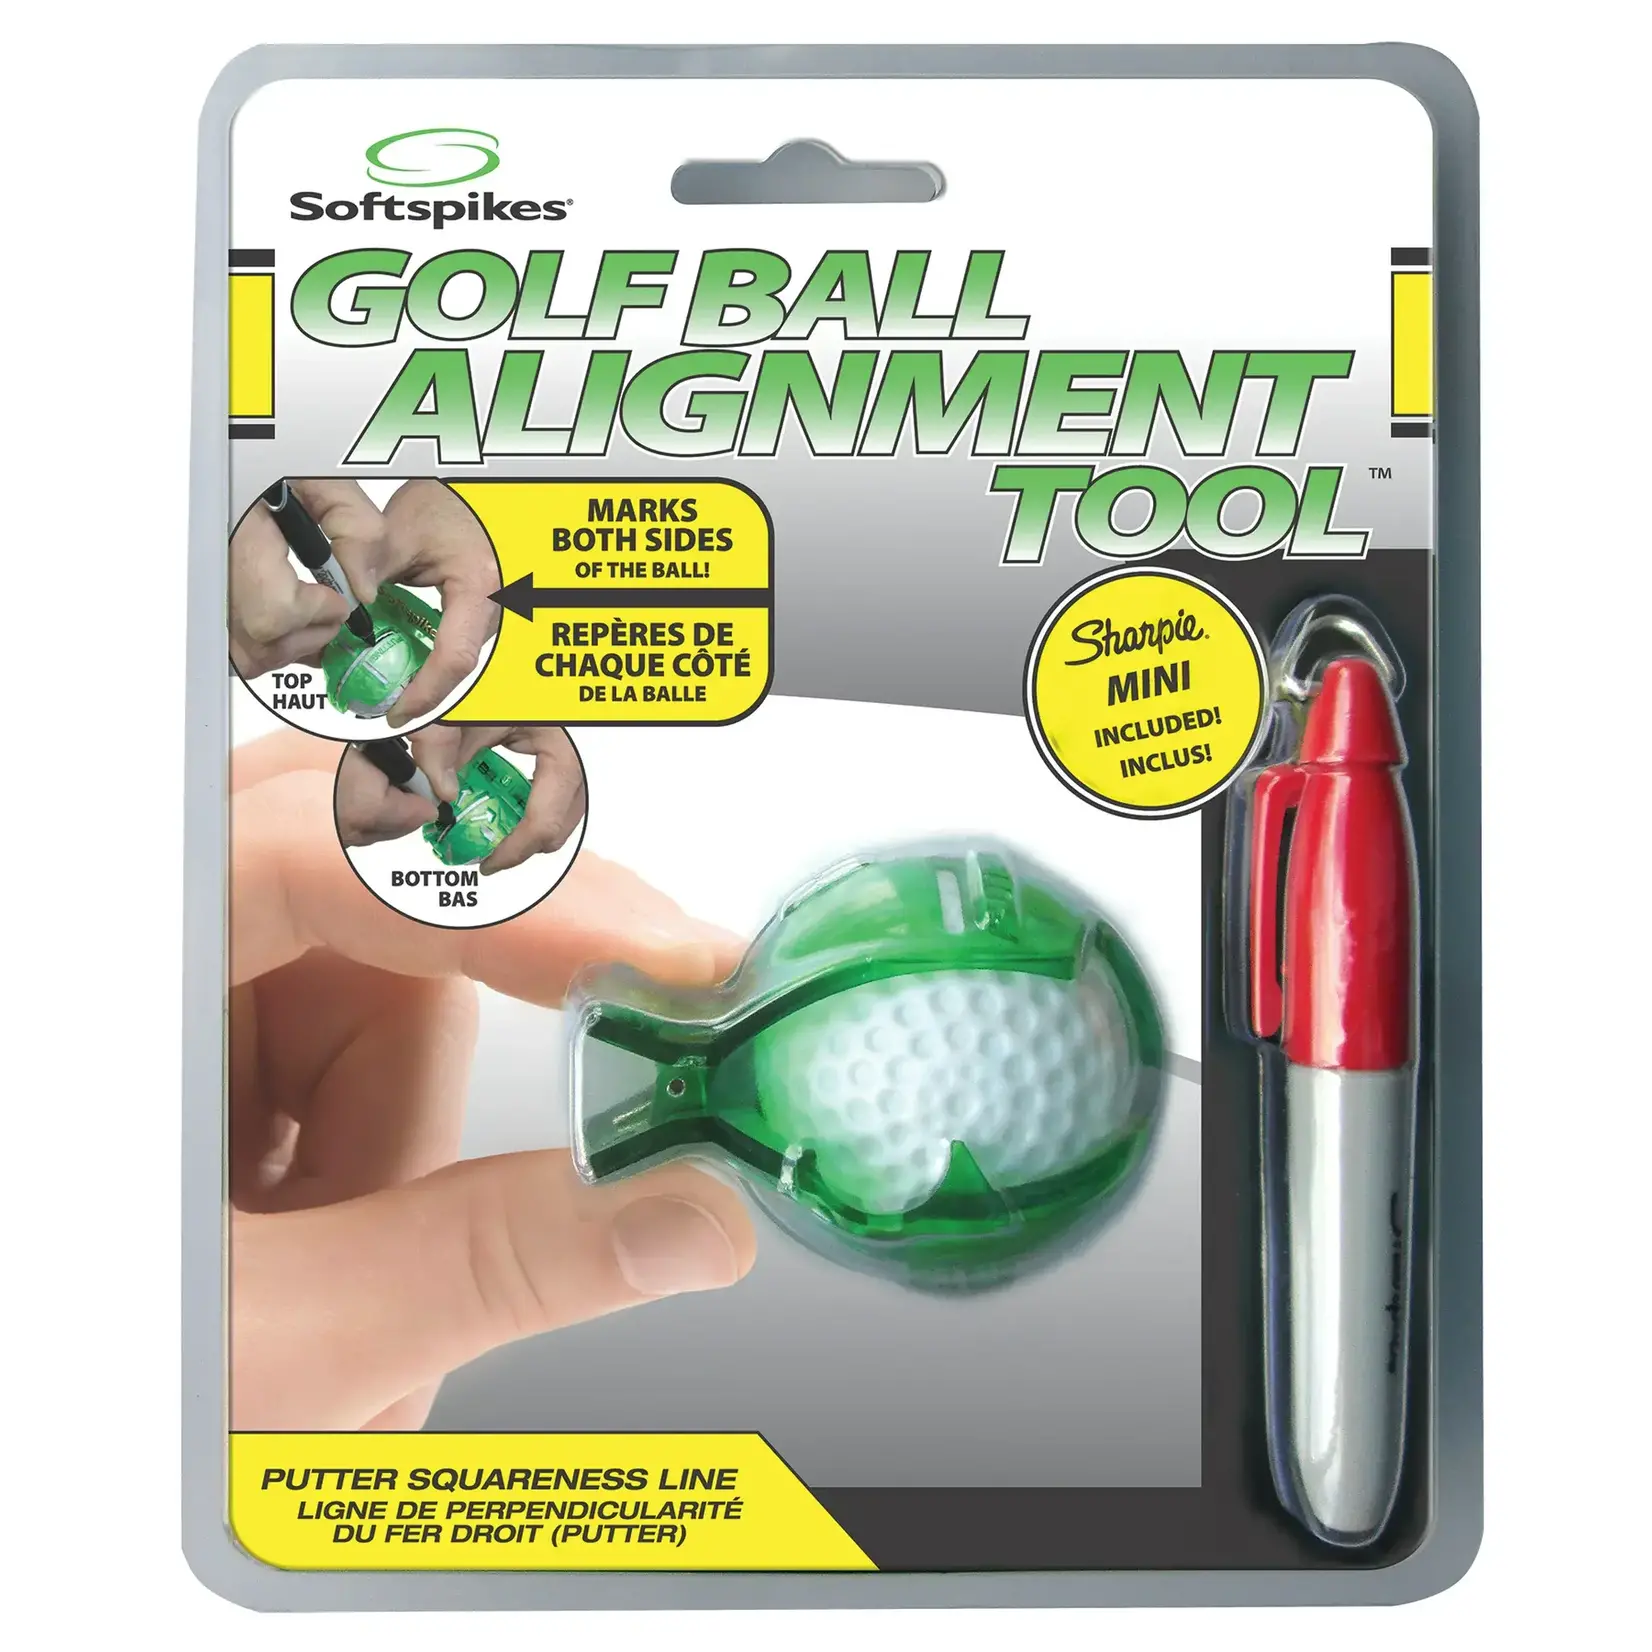 Softspikes Golfball Alignment Tool